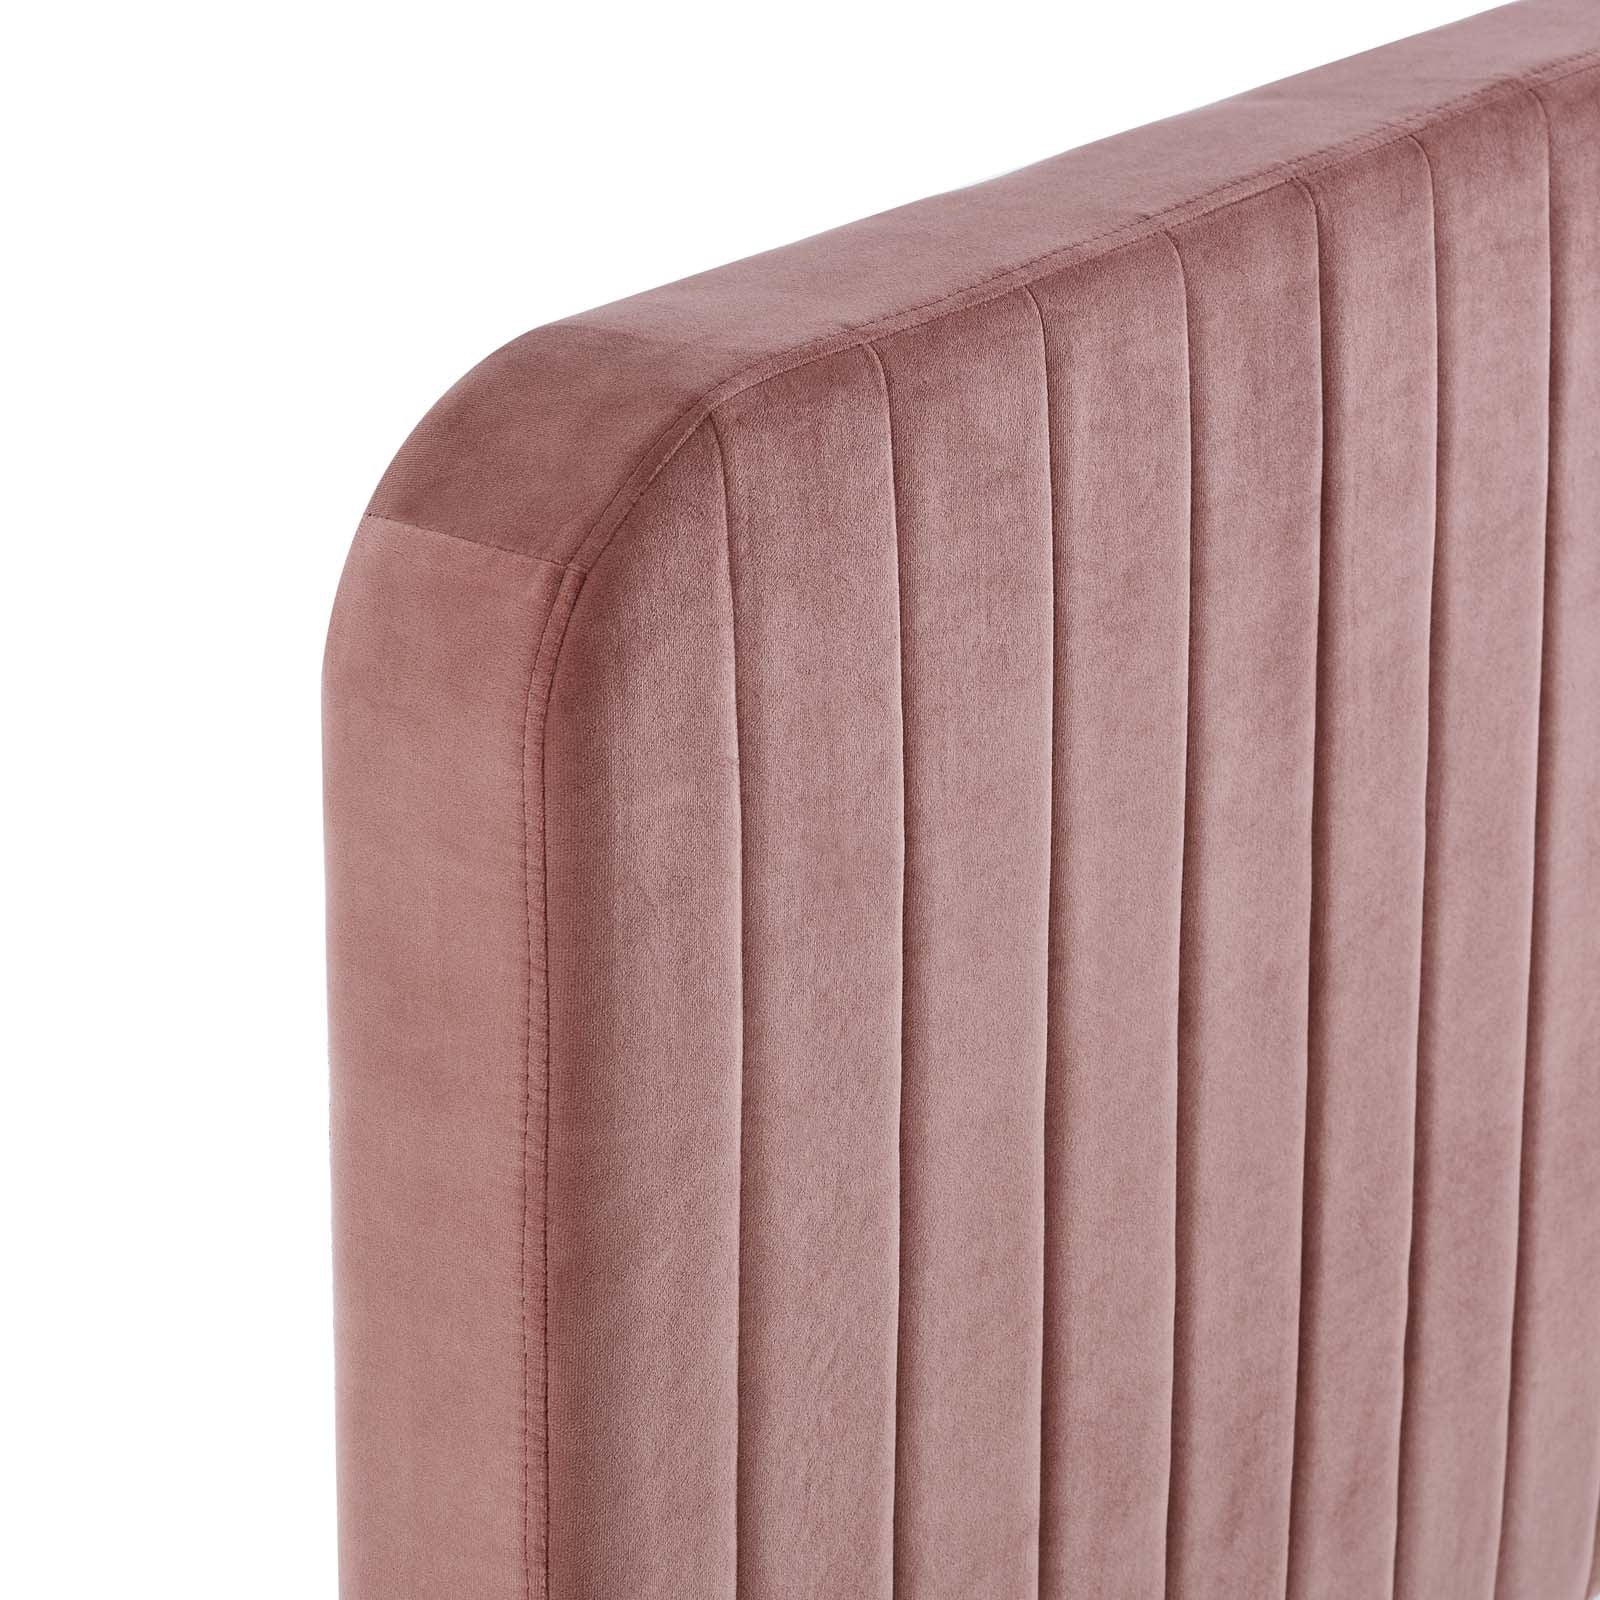 Modway Beds - Celine Channel Tufted Performance Velvet Queen Bed Dusty Rose